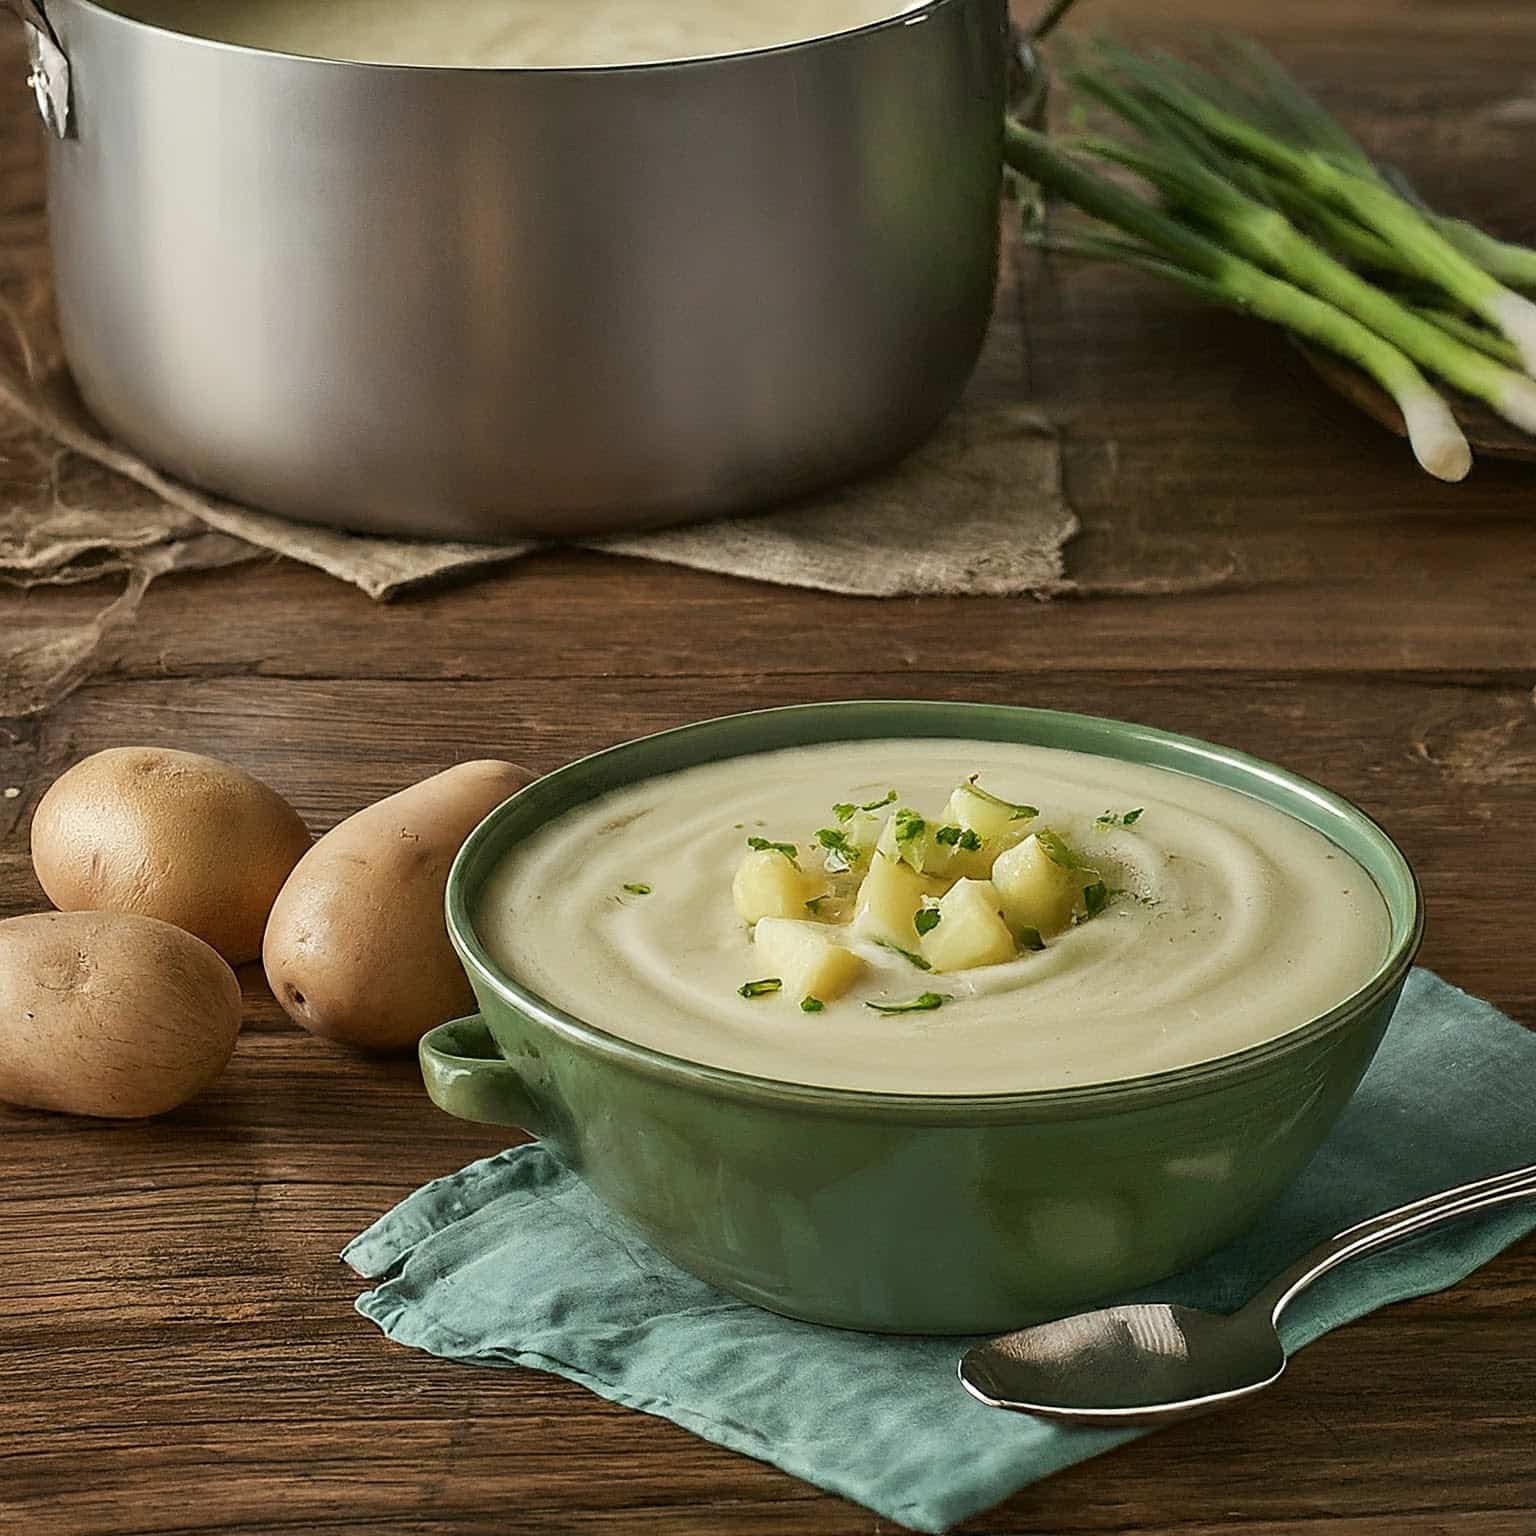 A picture of a green bowl with Potato Soup in it. Three pieces of Potatoes lay beside it and a pot is behind.